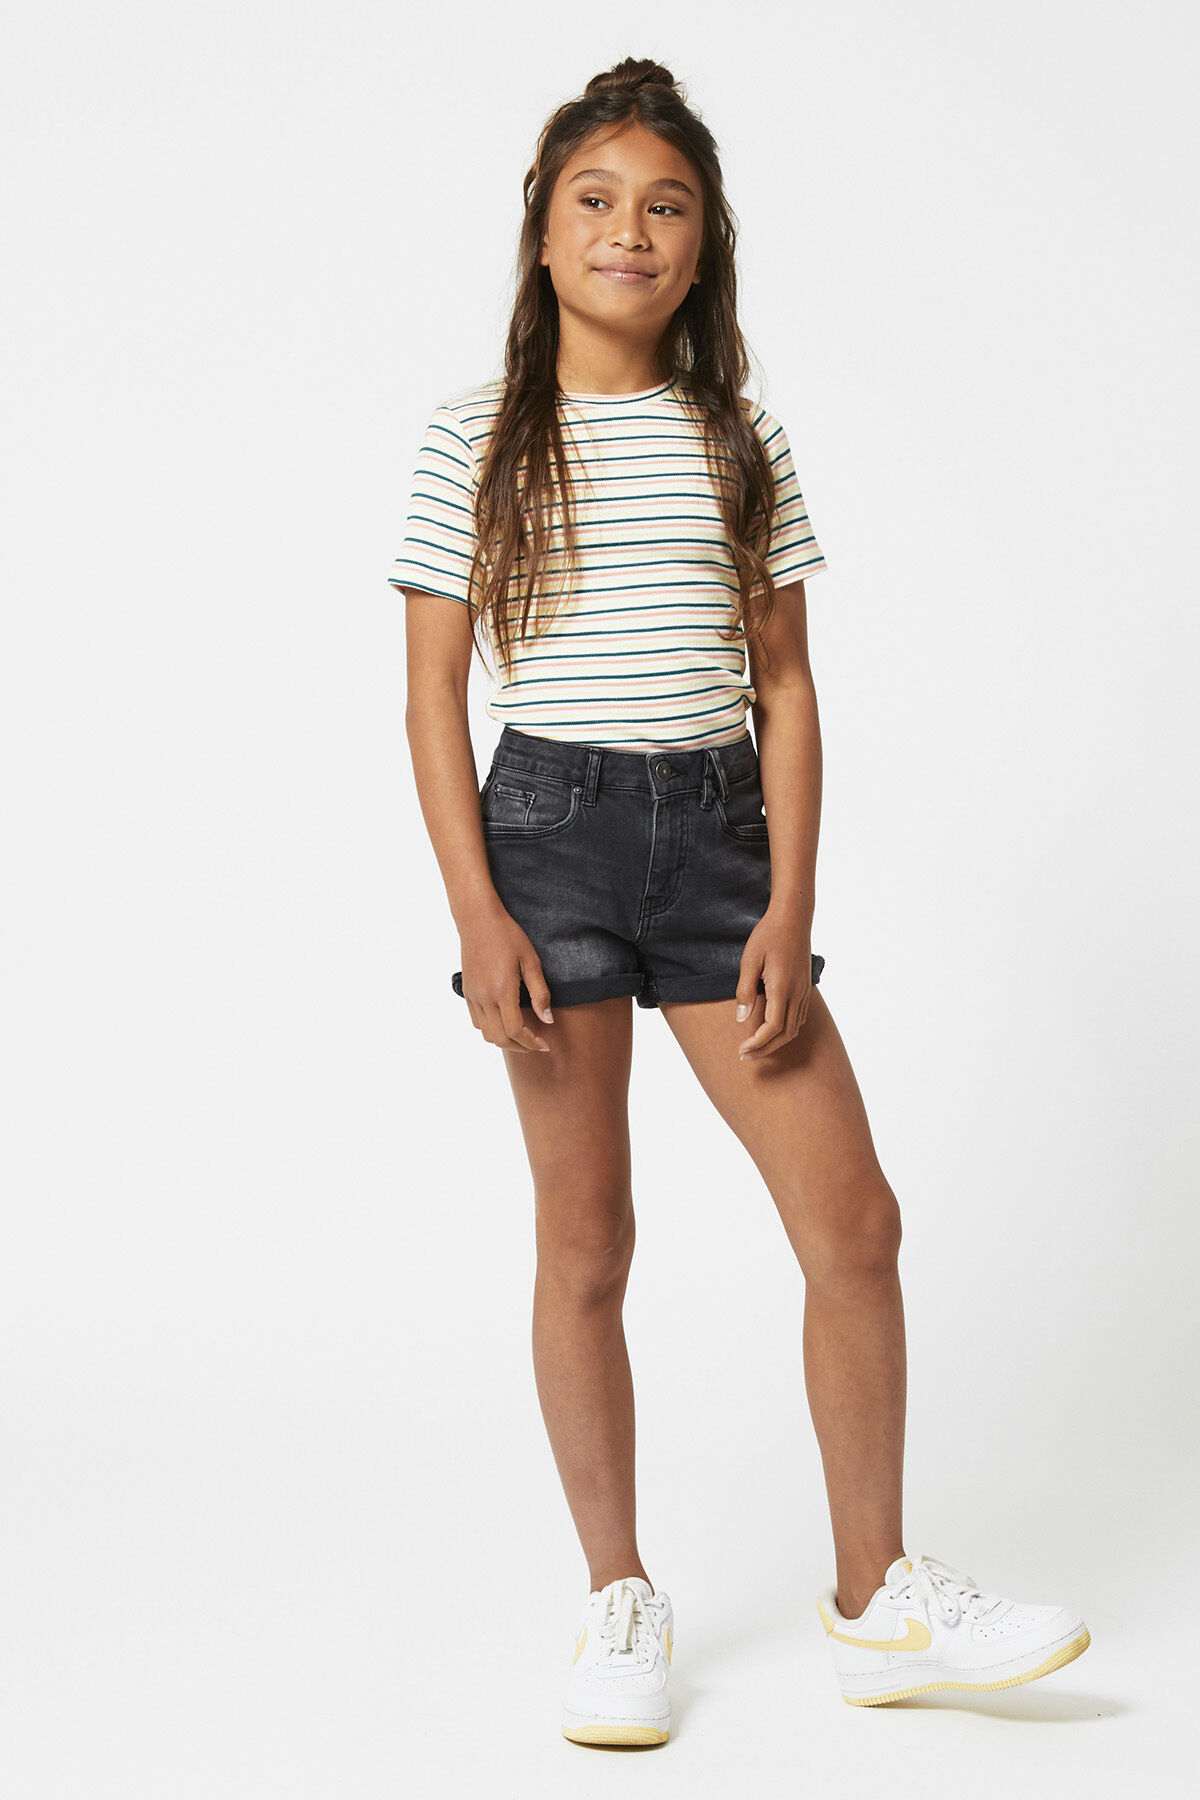 Kids Black Faded Denim Shorts by Main Story on Sale